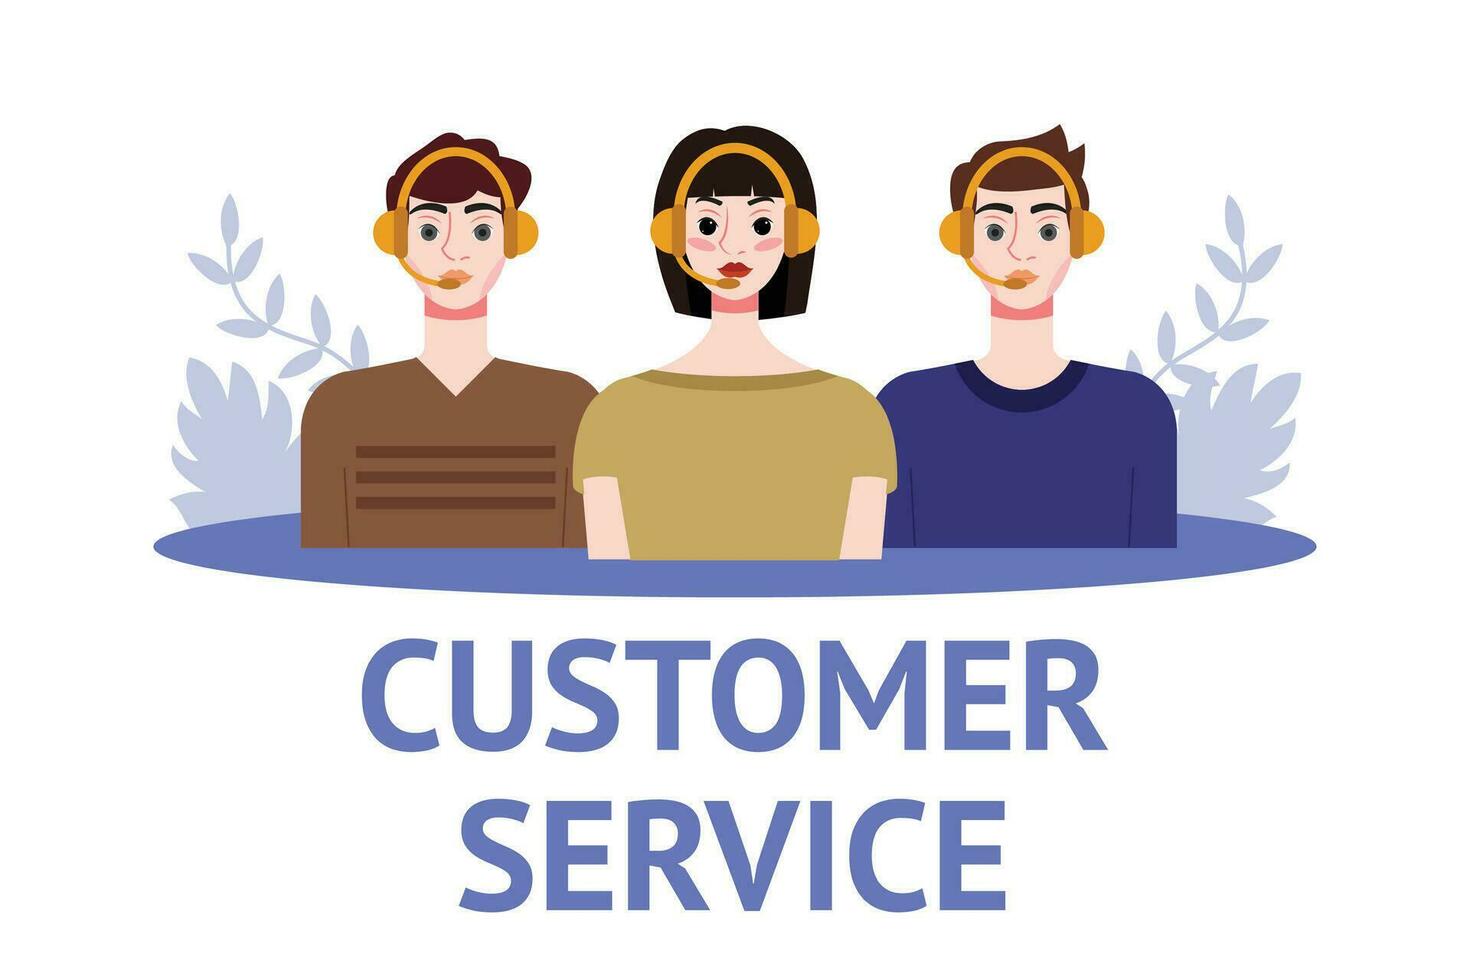 Customer service concept. People with headsets. Vector illustration in flat style